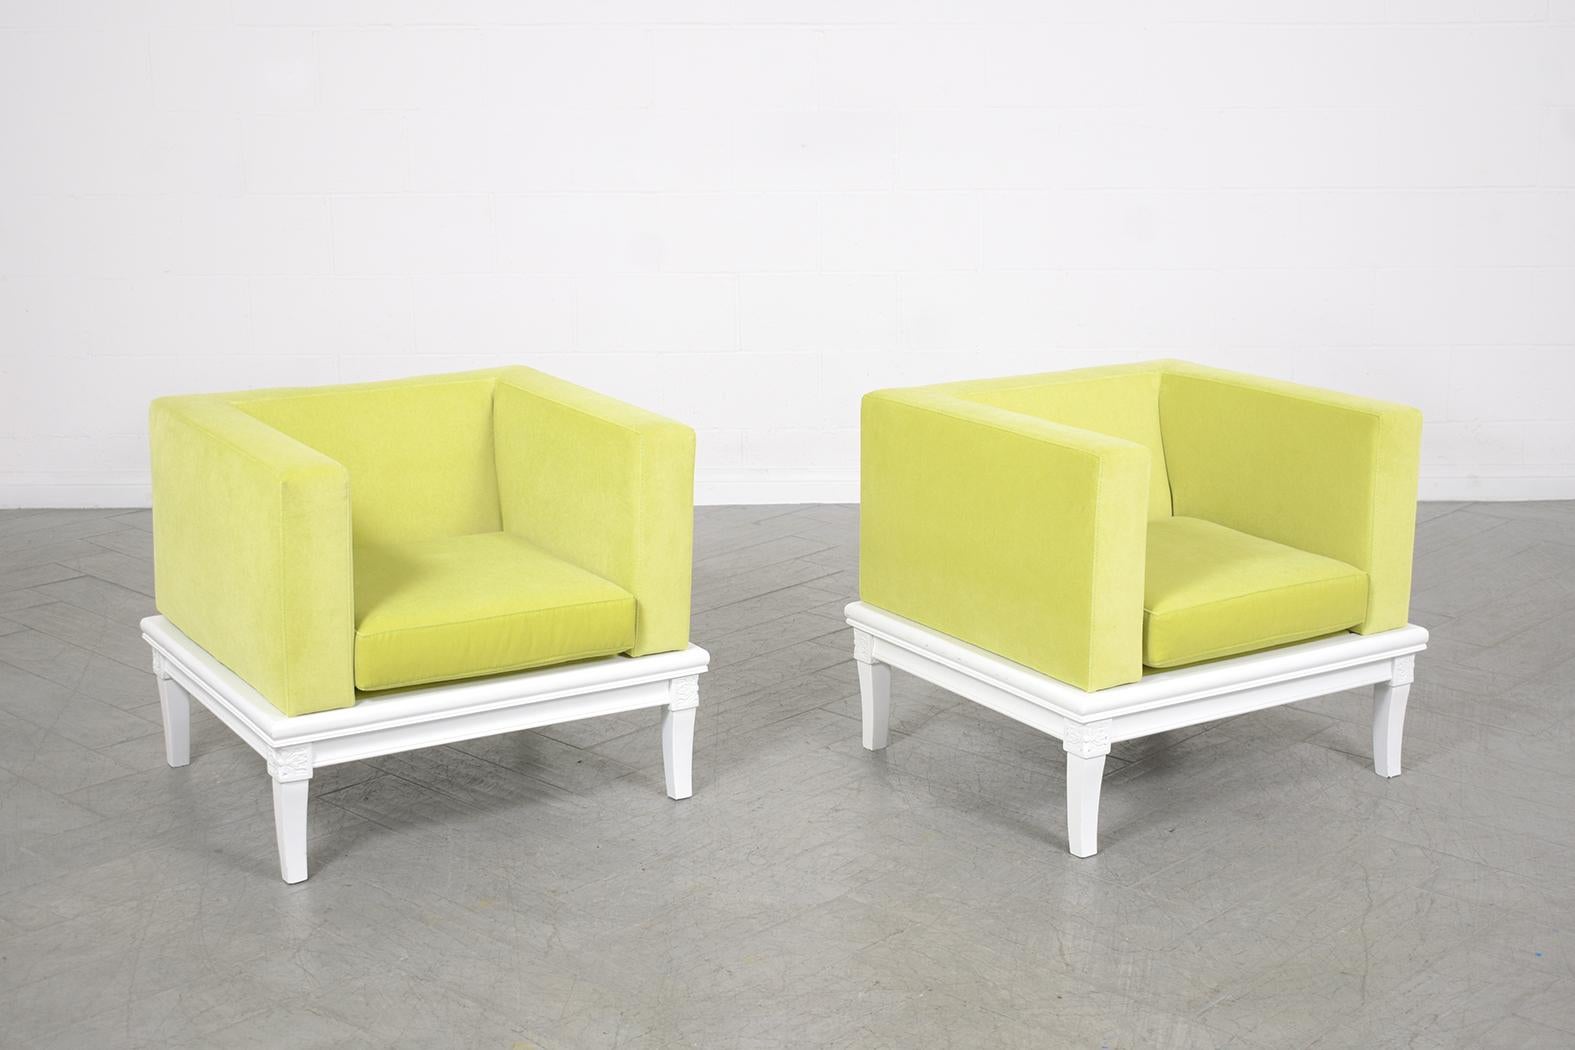 Lacquered Modern Green Velvet Lounge Chairs: Vintage Elegance Meets Contemporary Comfort